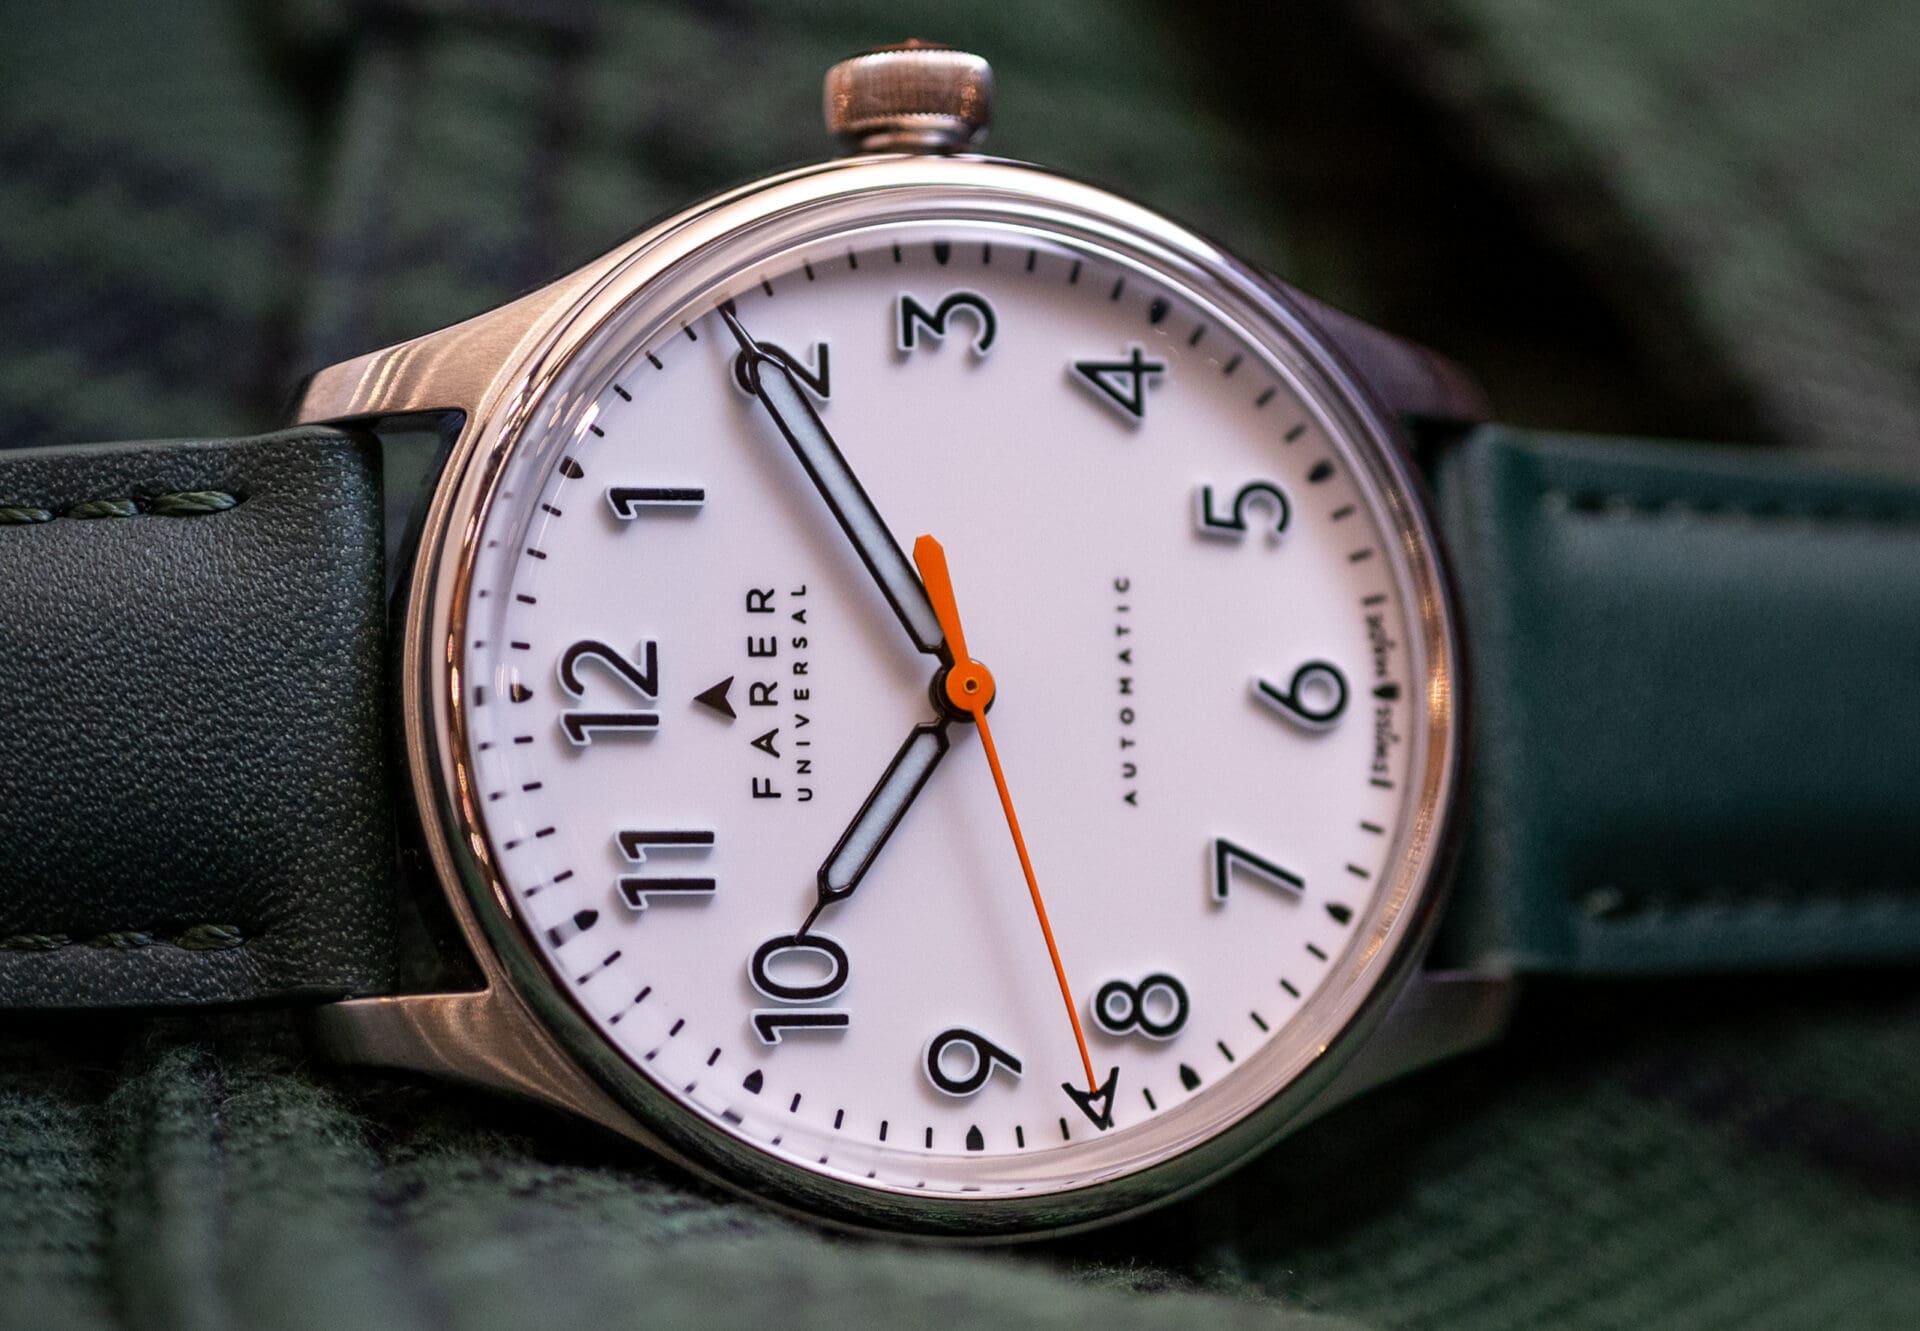 The British Invasion: Farer Debuts Four New Watches in New York City